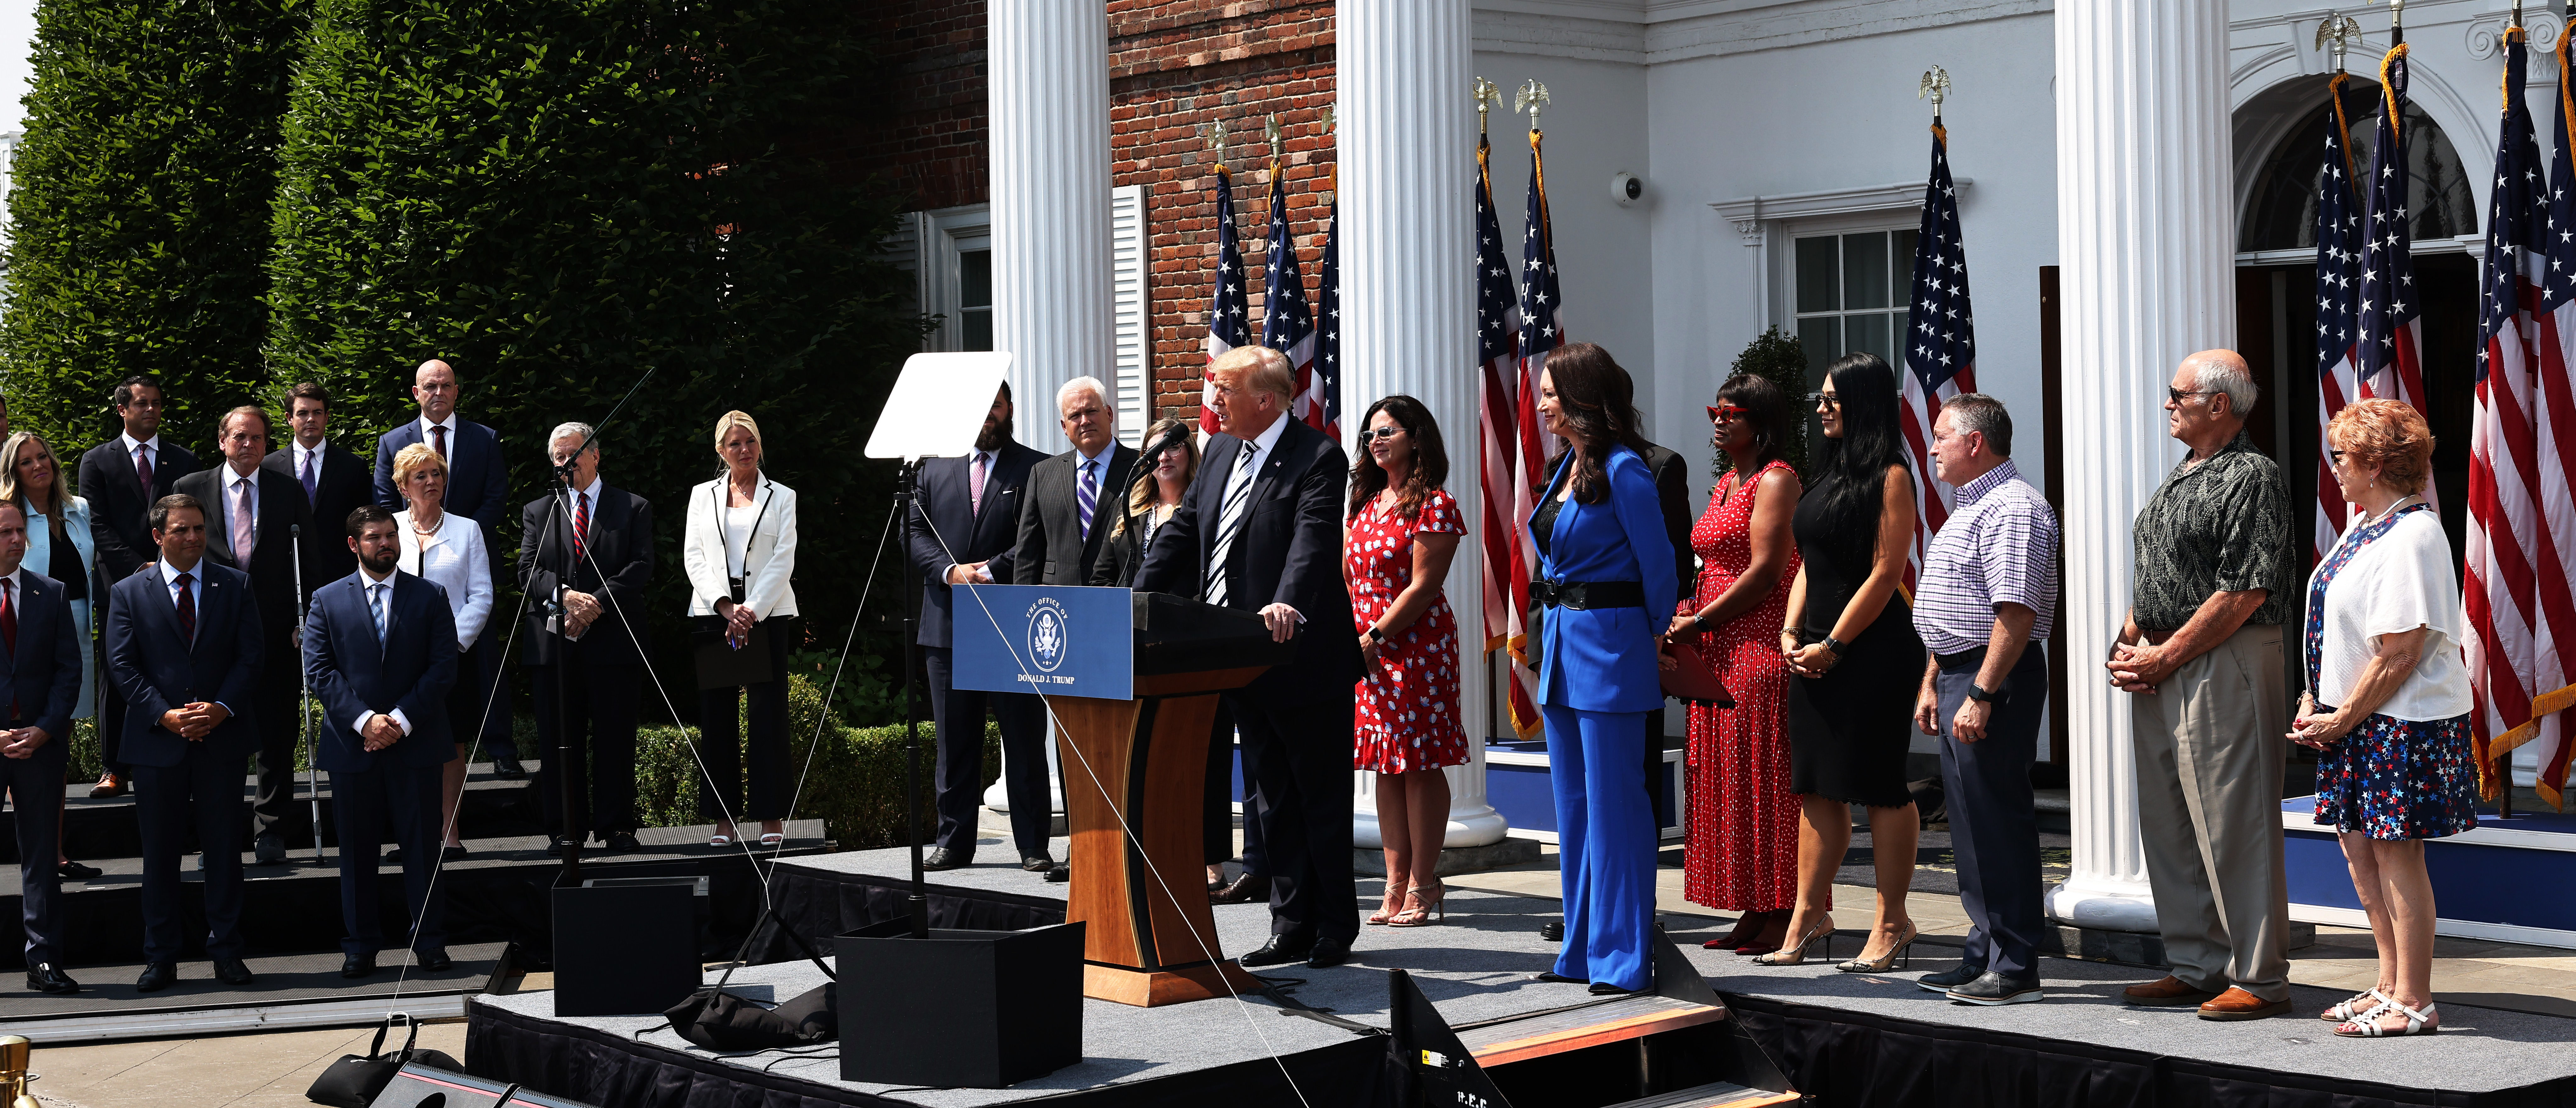 BEDMINSTER, NEW JERSEY - JULY 07: Former President Donald Trump speaks during a press conference announcing a class action lawsuit against big tech companies at the Trump National Golf Club Bedminster on July 07, 2021 in Bedminster, New Jersey. (Photo by Michael M. Santiago/Getty Images)